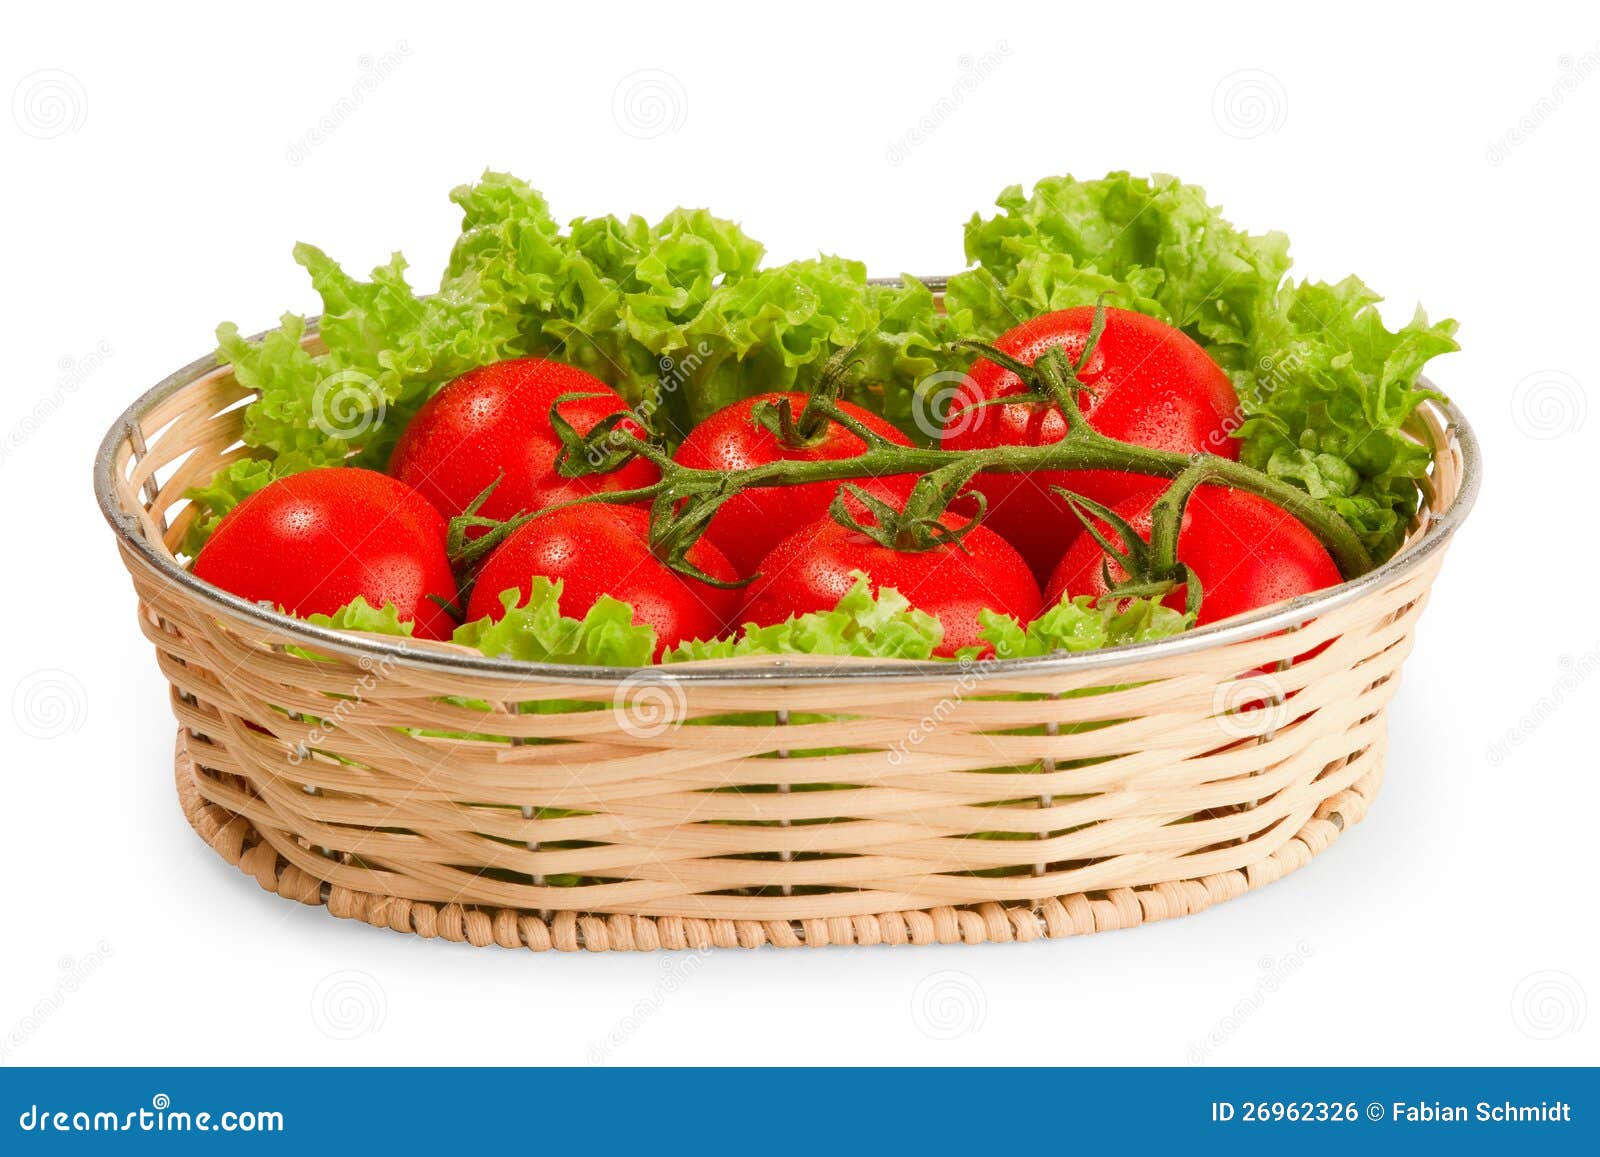 Tomate with salad in basket on white background